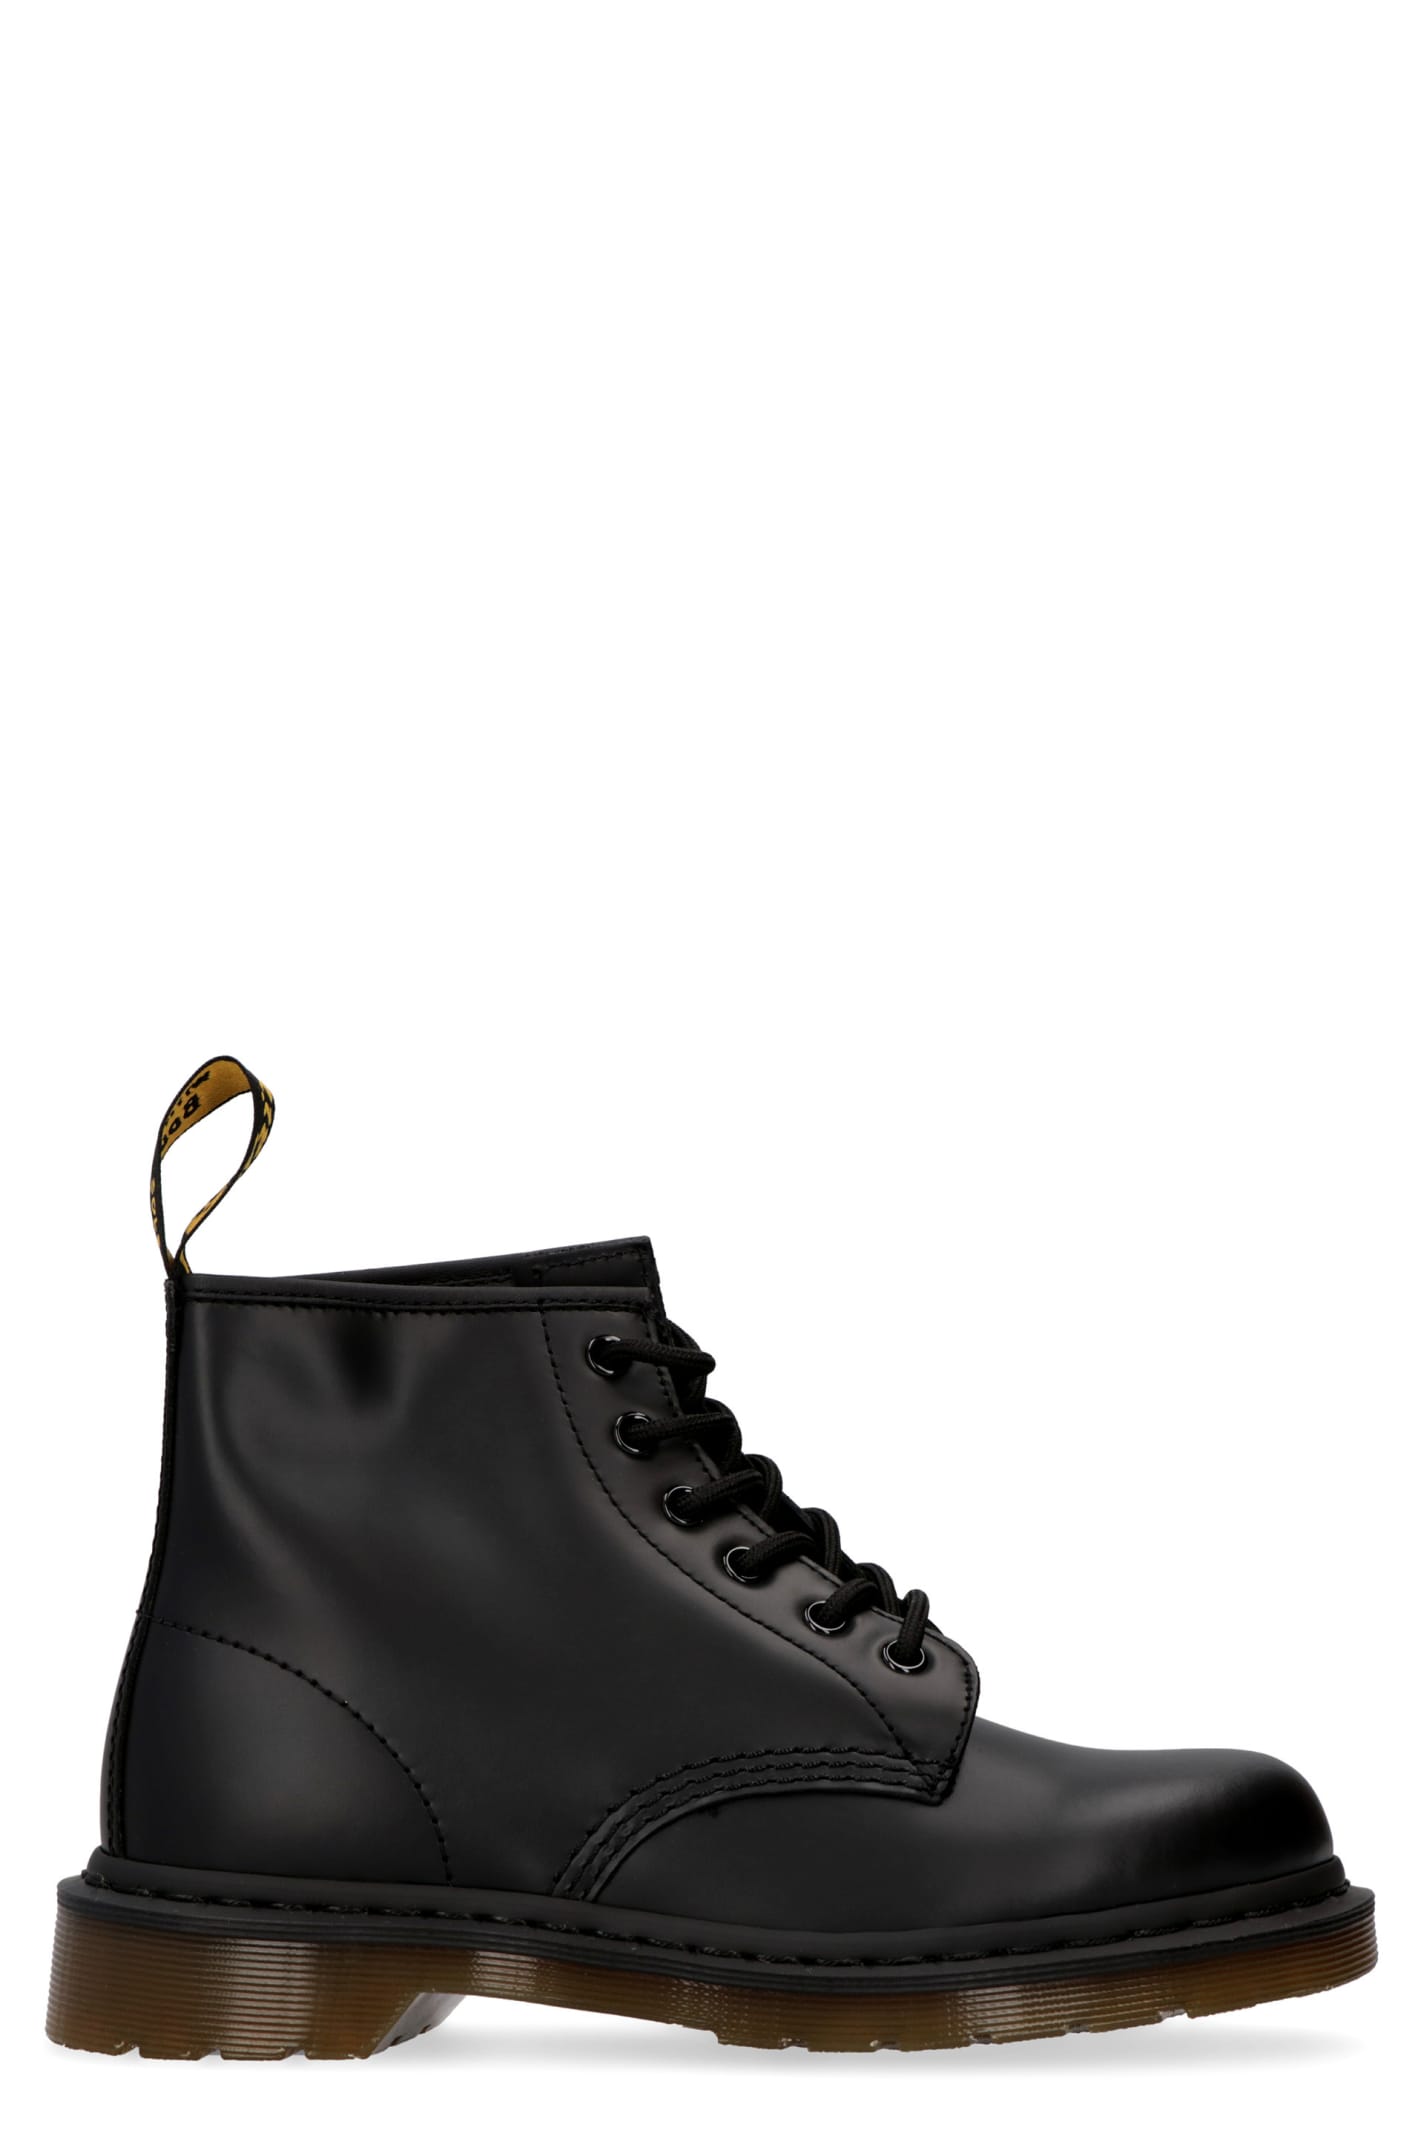 Buy Dr. Martens 101 Lace-up Ankle Boots online, shop Dr. Martens shoes with free shipping